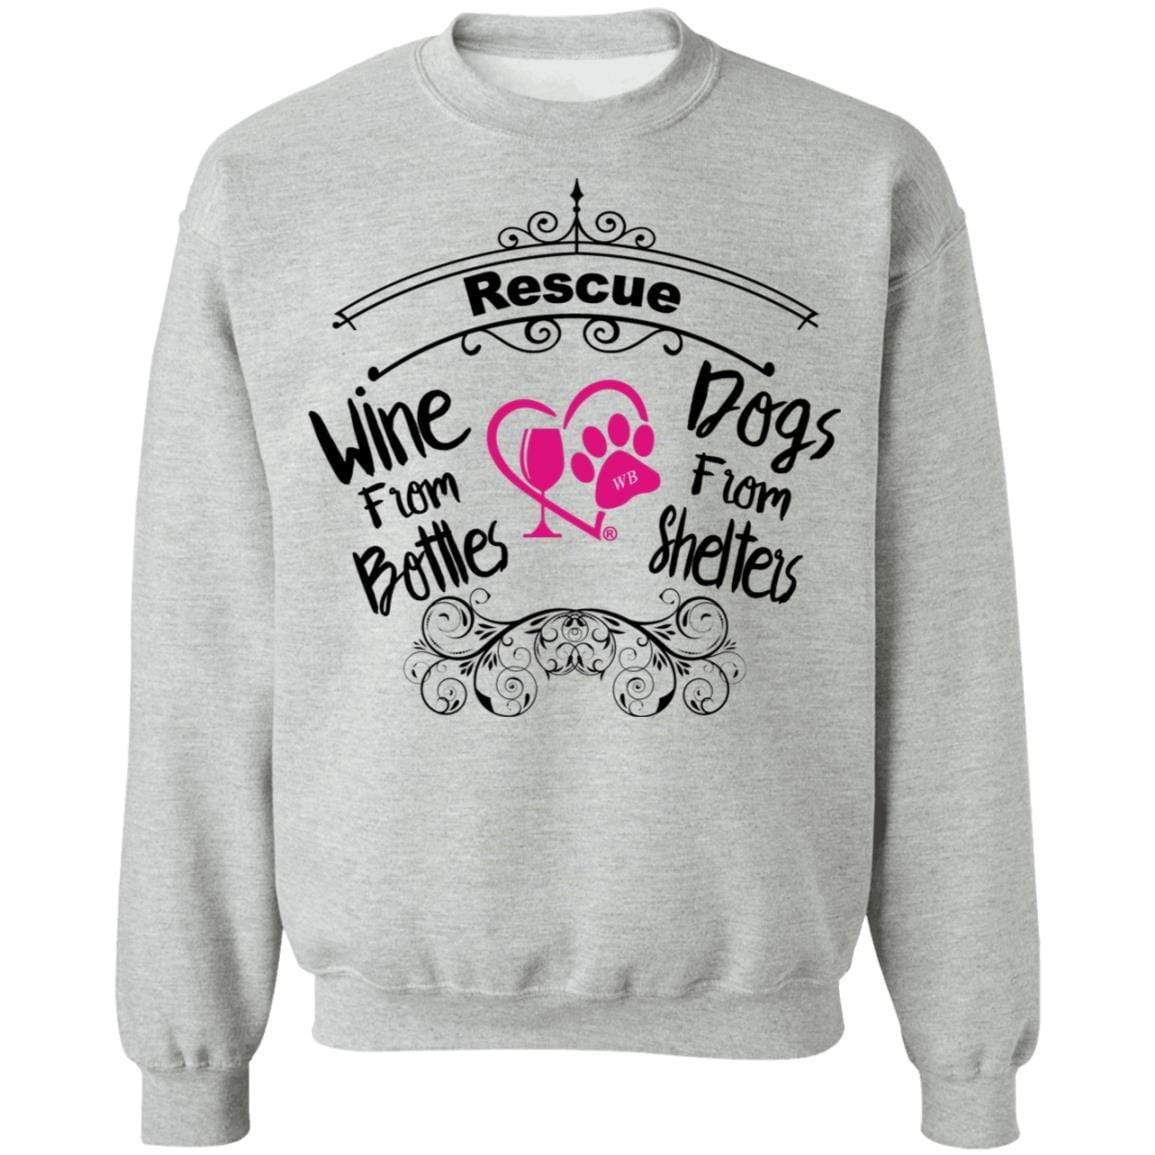 Sweatshirts Sport Grey / S Winey Bitches Co "Rescue Wine from Bottles, Dogs from Shelters" Crewneck Pullover Sweatshirt  8 oz. WineyBitchesCo